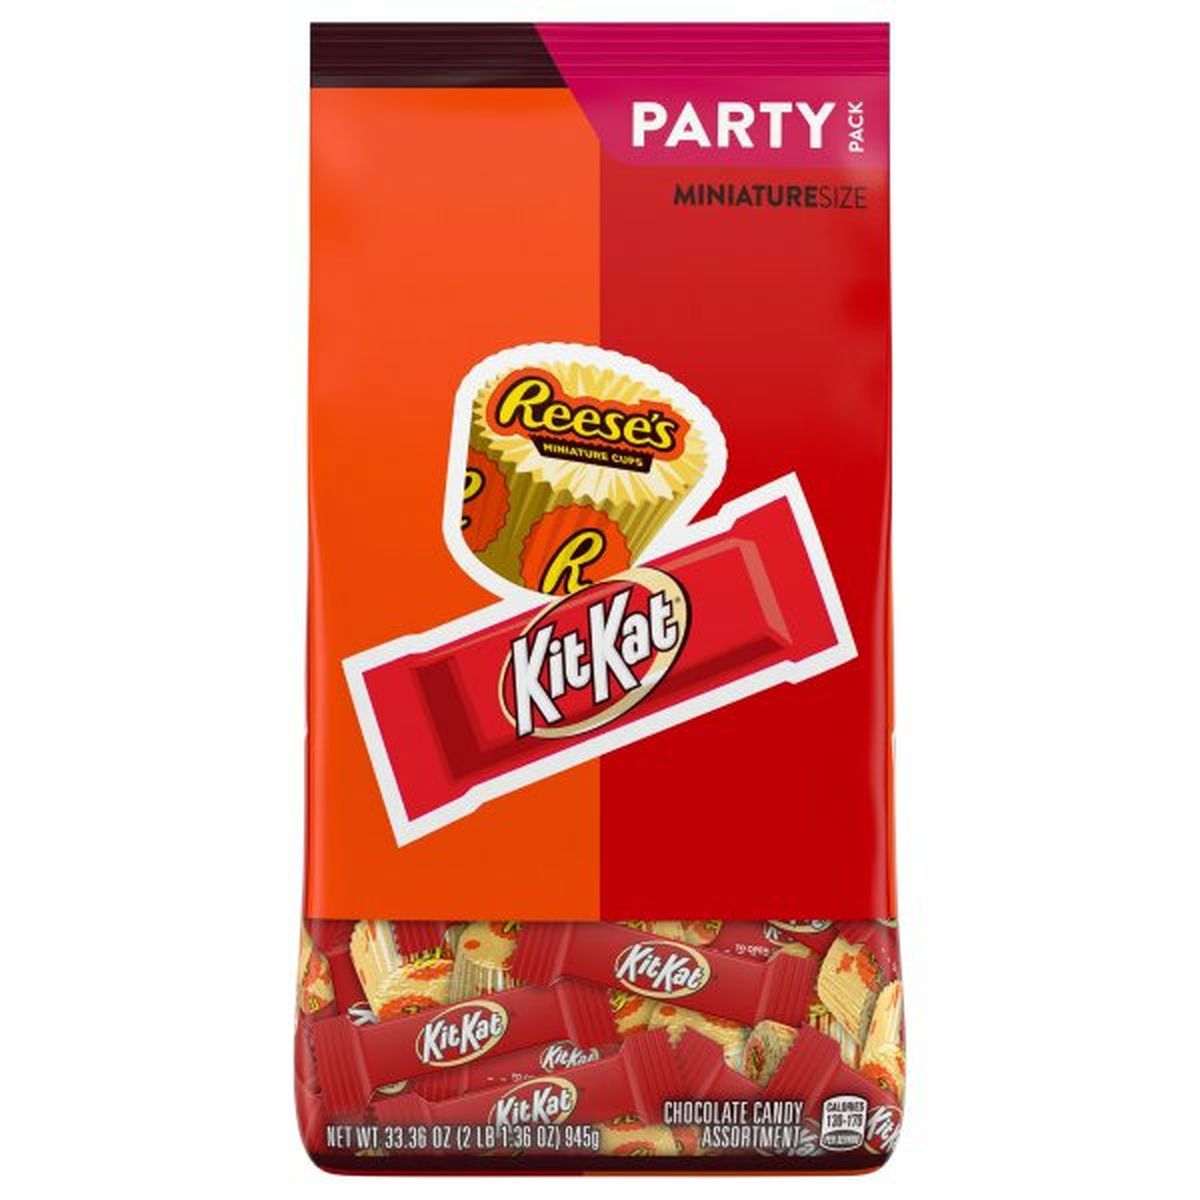 Calories in Hershey's Candy Assortment, Chocolate, Miniature Size, Party Pack